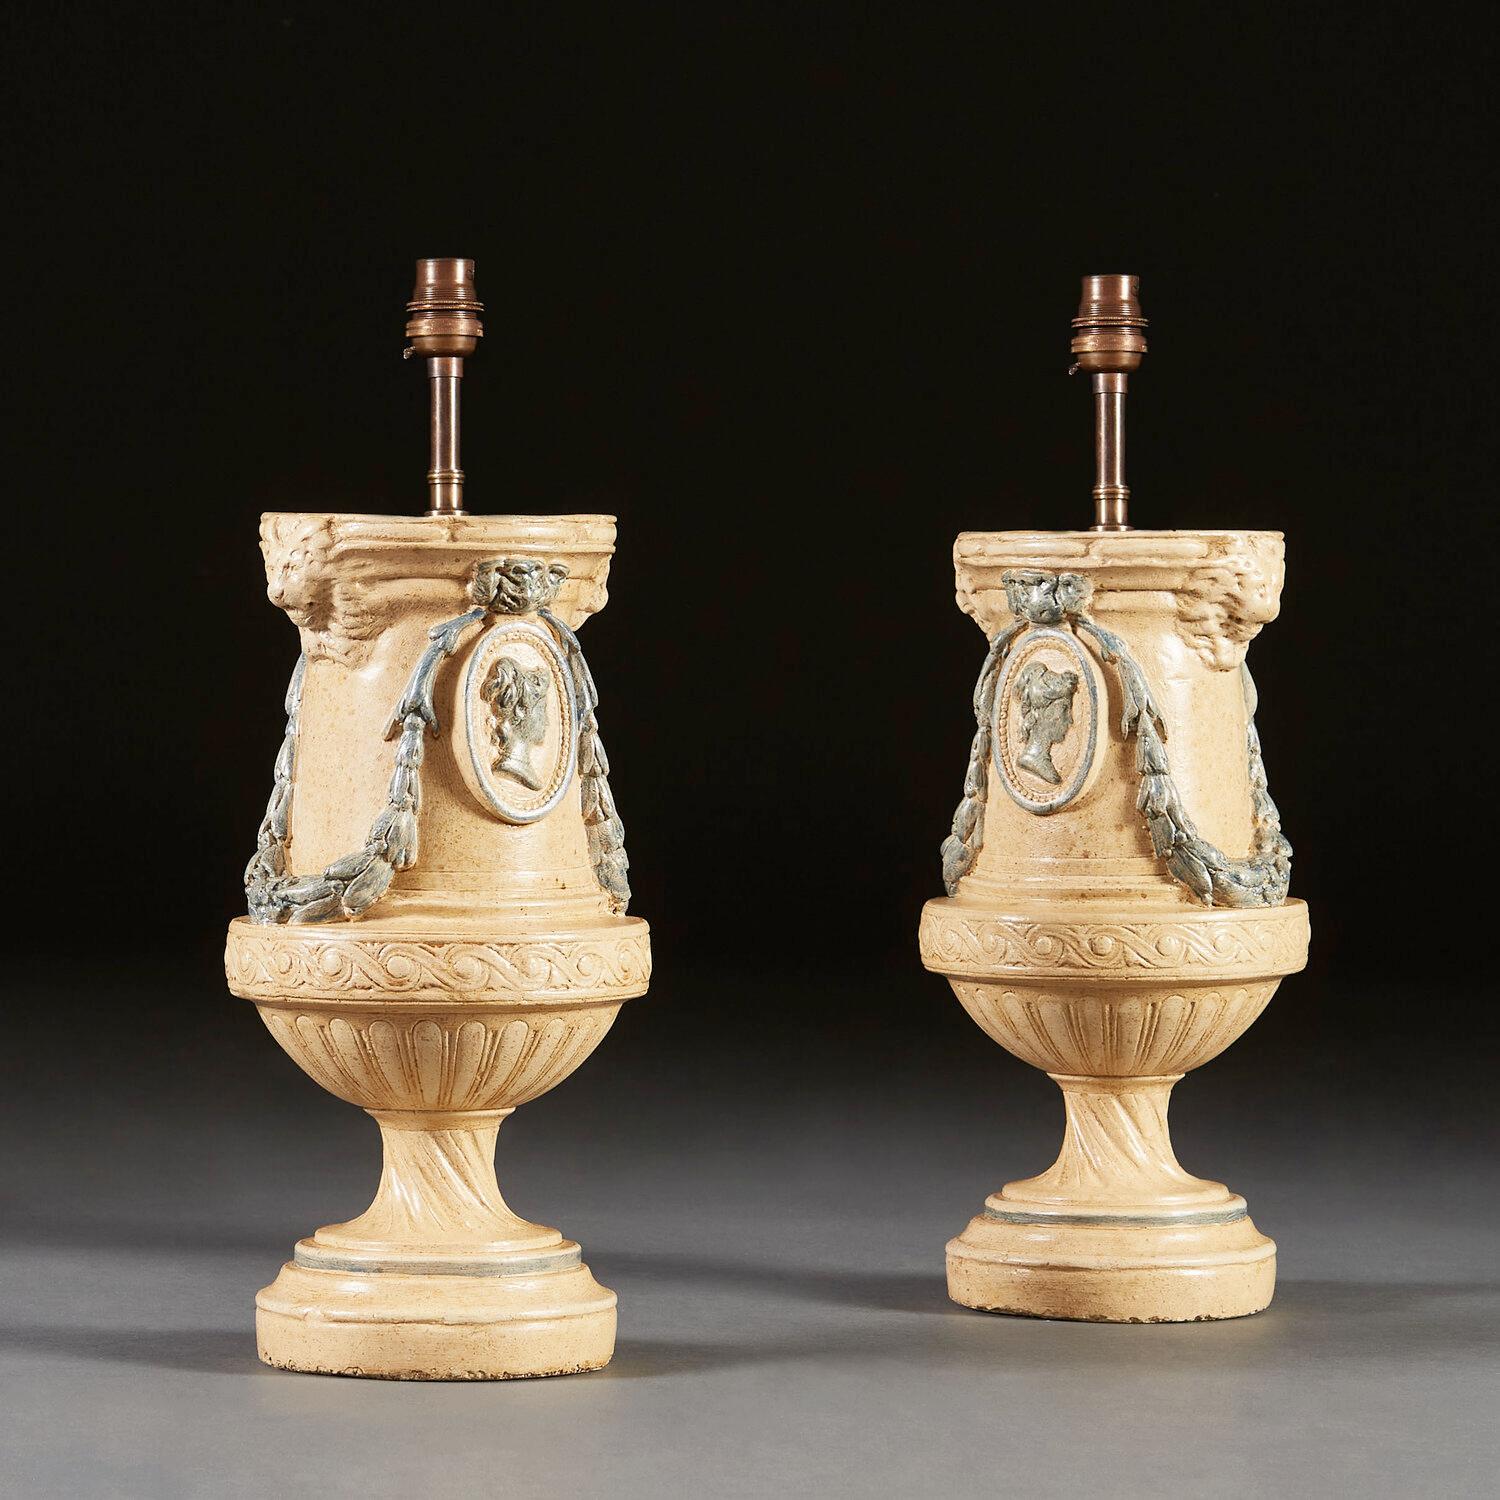 English Pair of 19th Century Painted Urns as Lamps